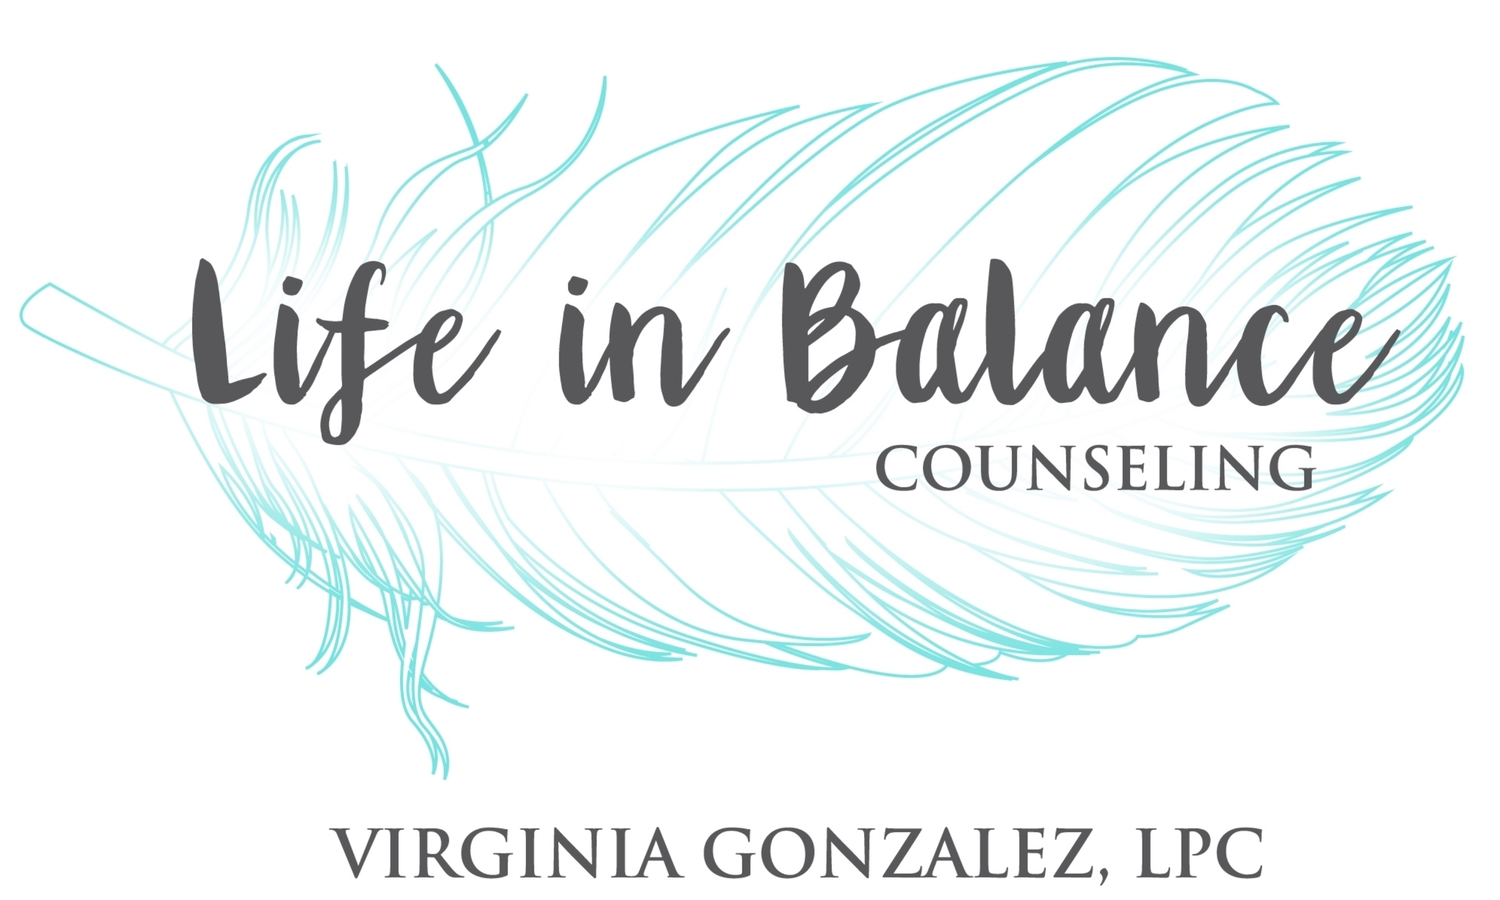 Life in Balance Counseling